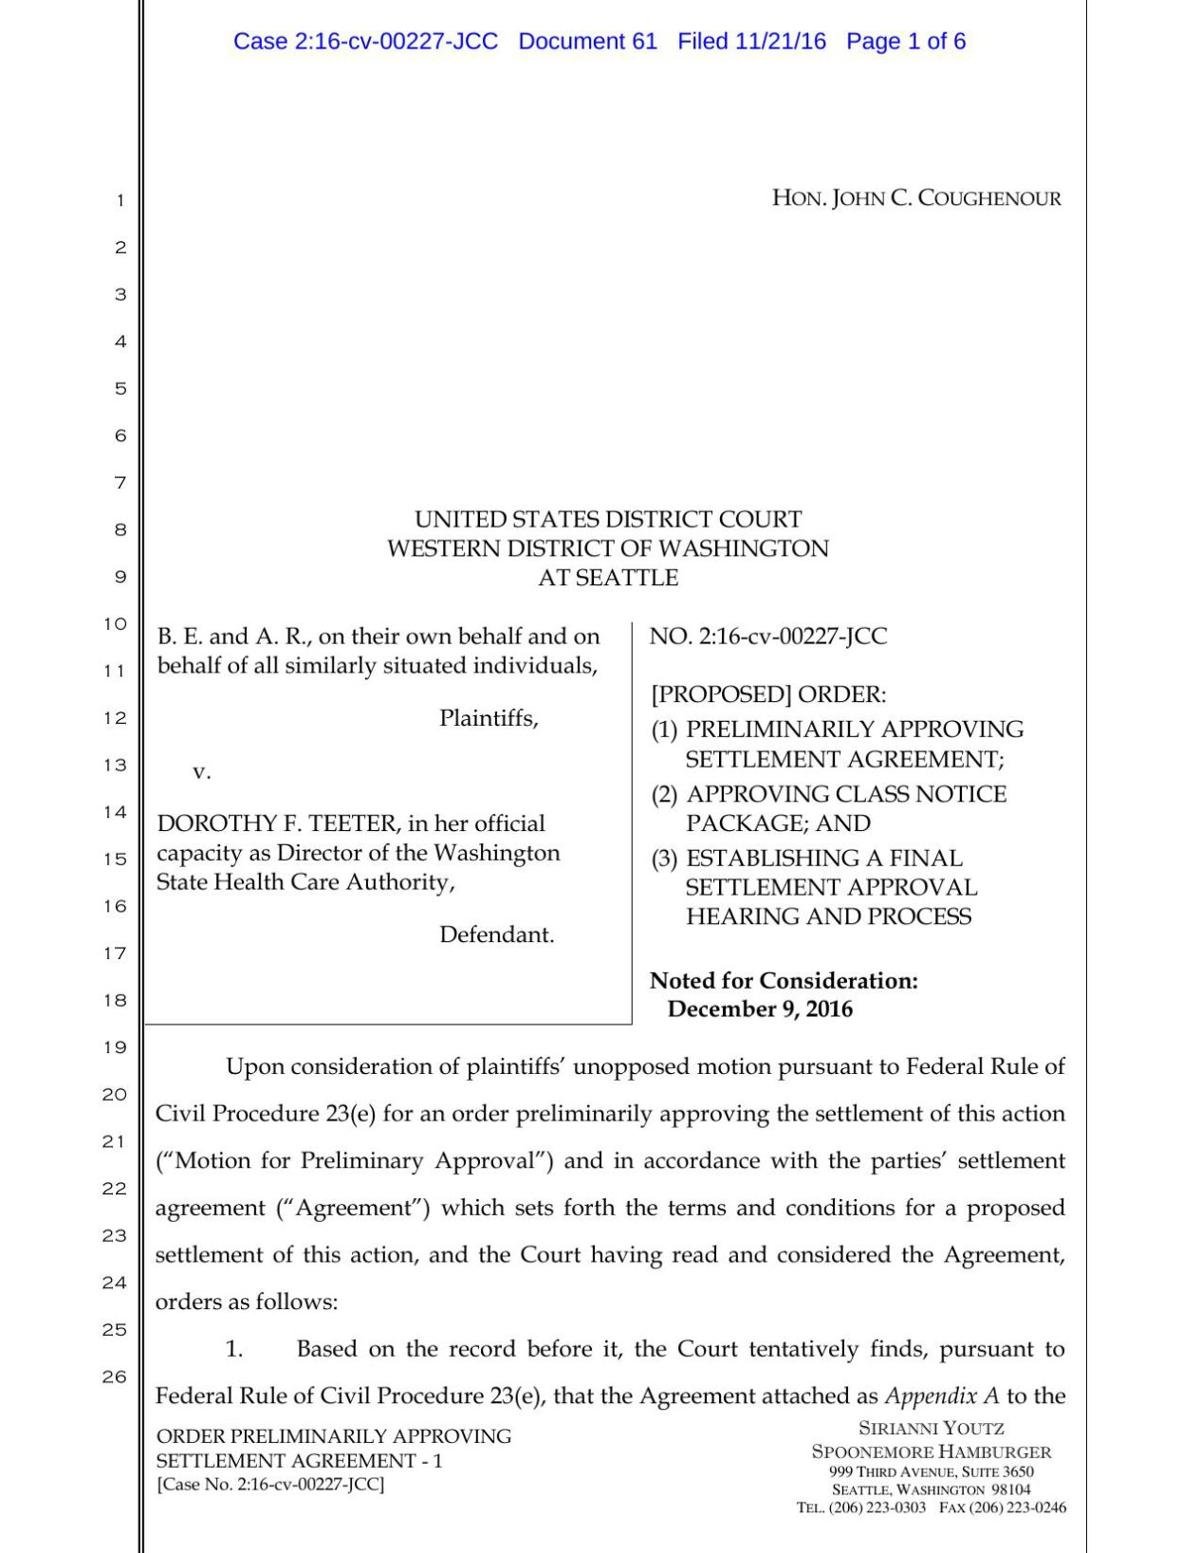 Proposed order for preliminary approval of settlement agreement